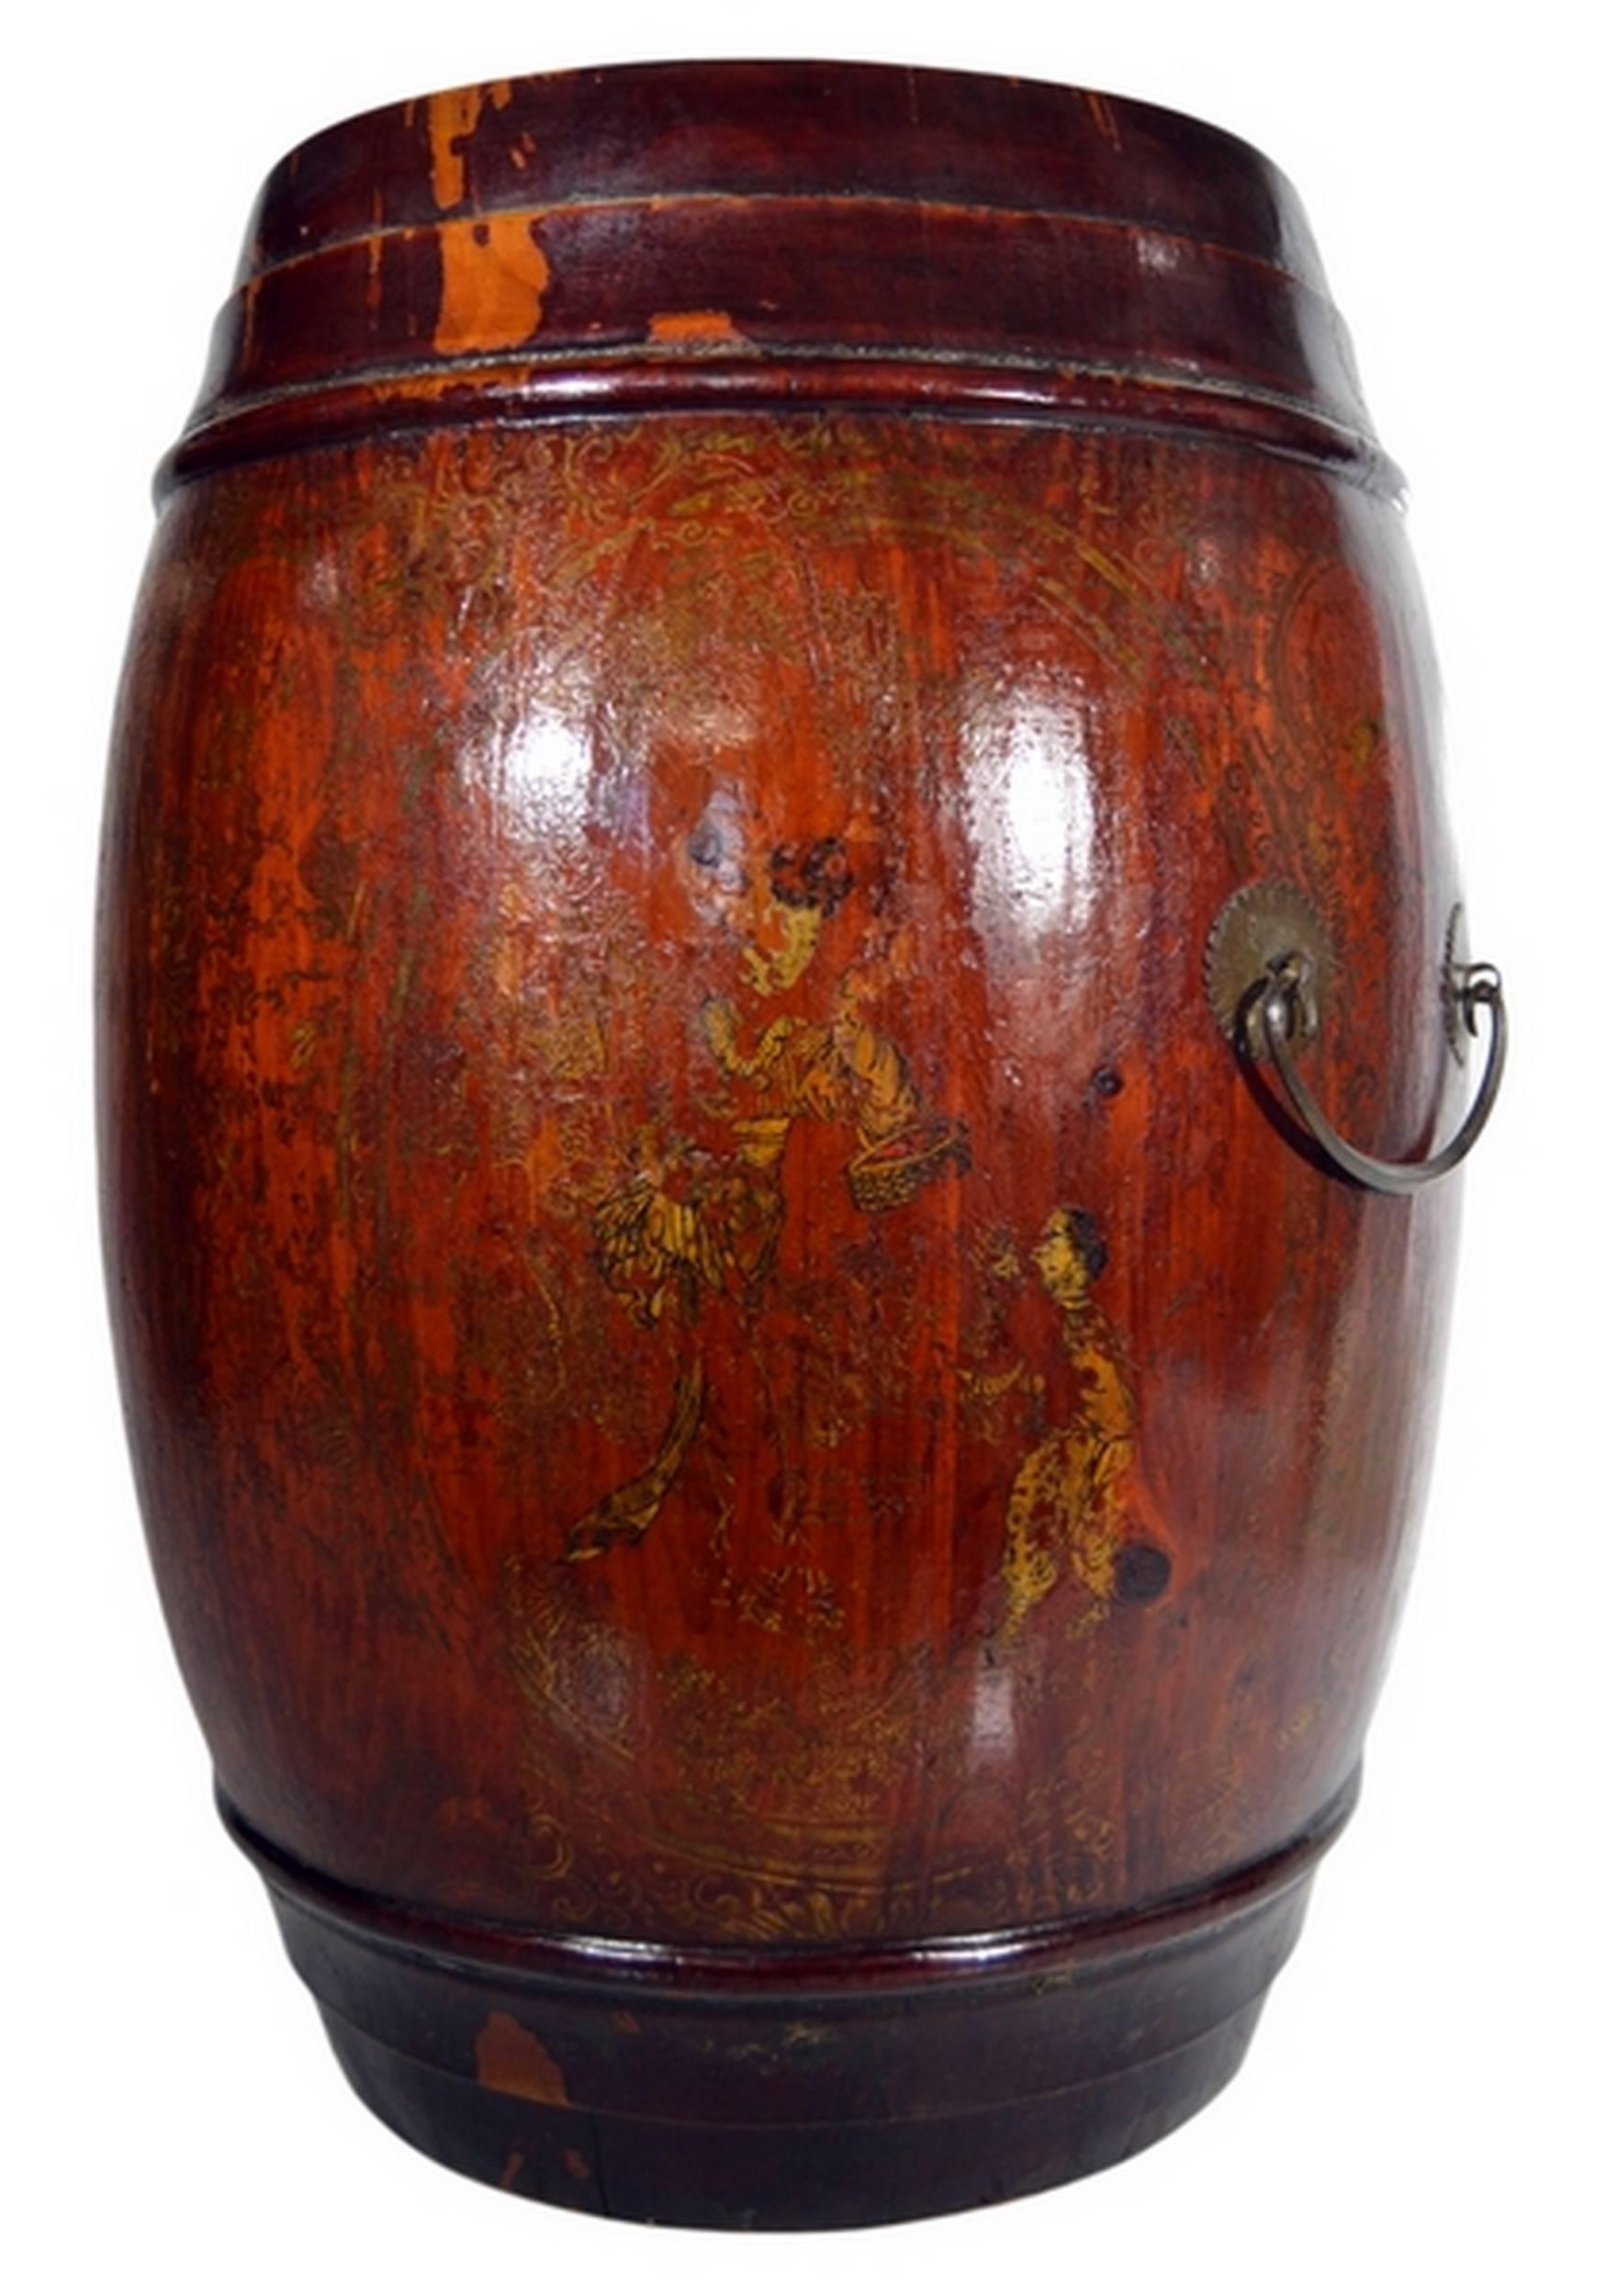 Chinese Antique Varnished Painted Wood Grain Barrel Basket from 19th Century China